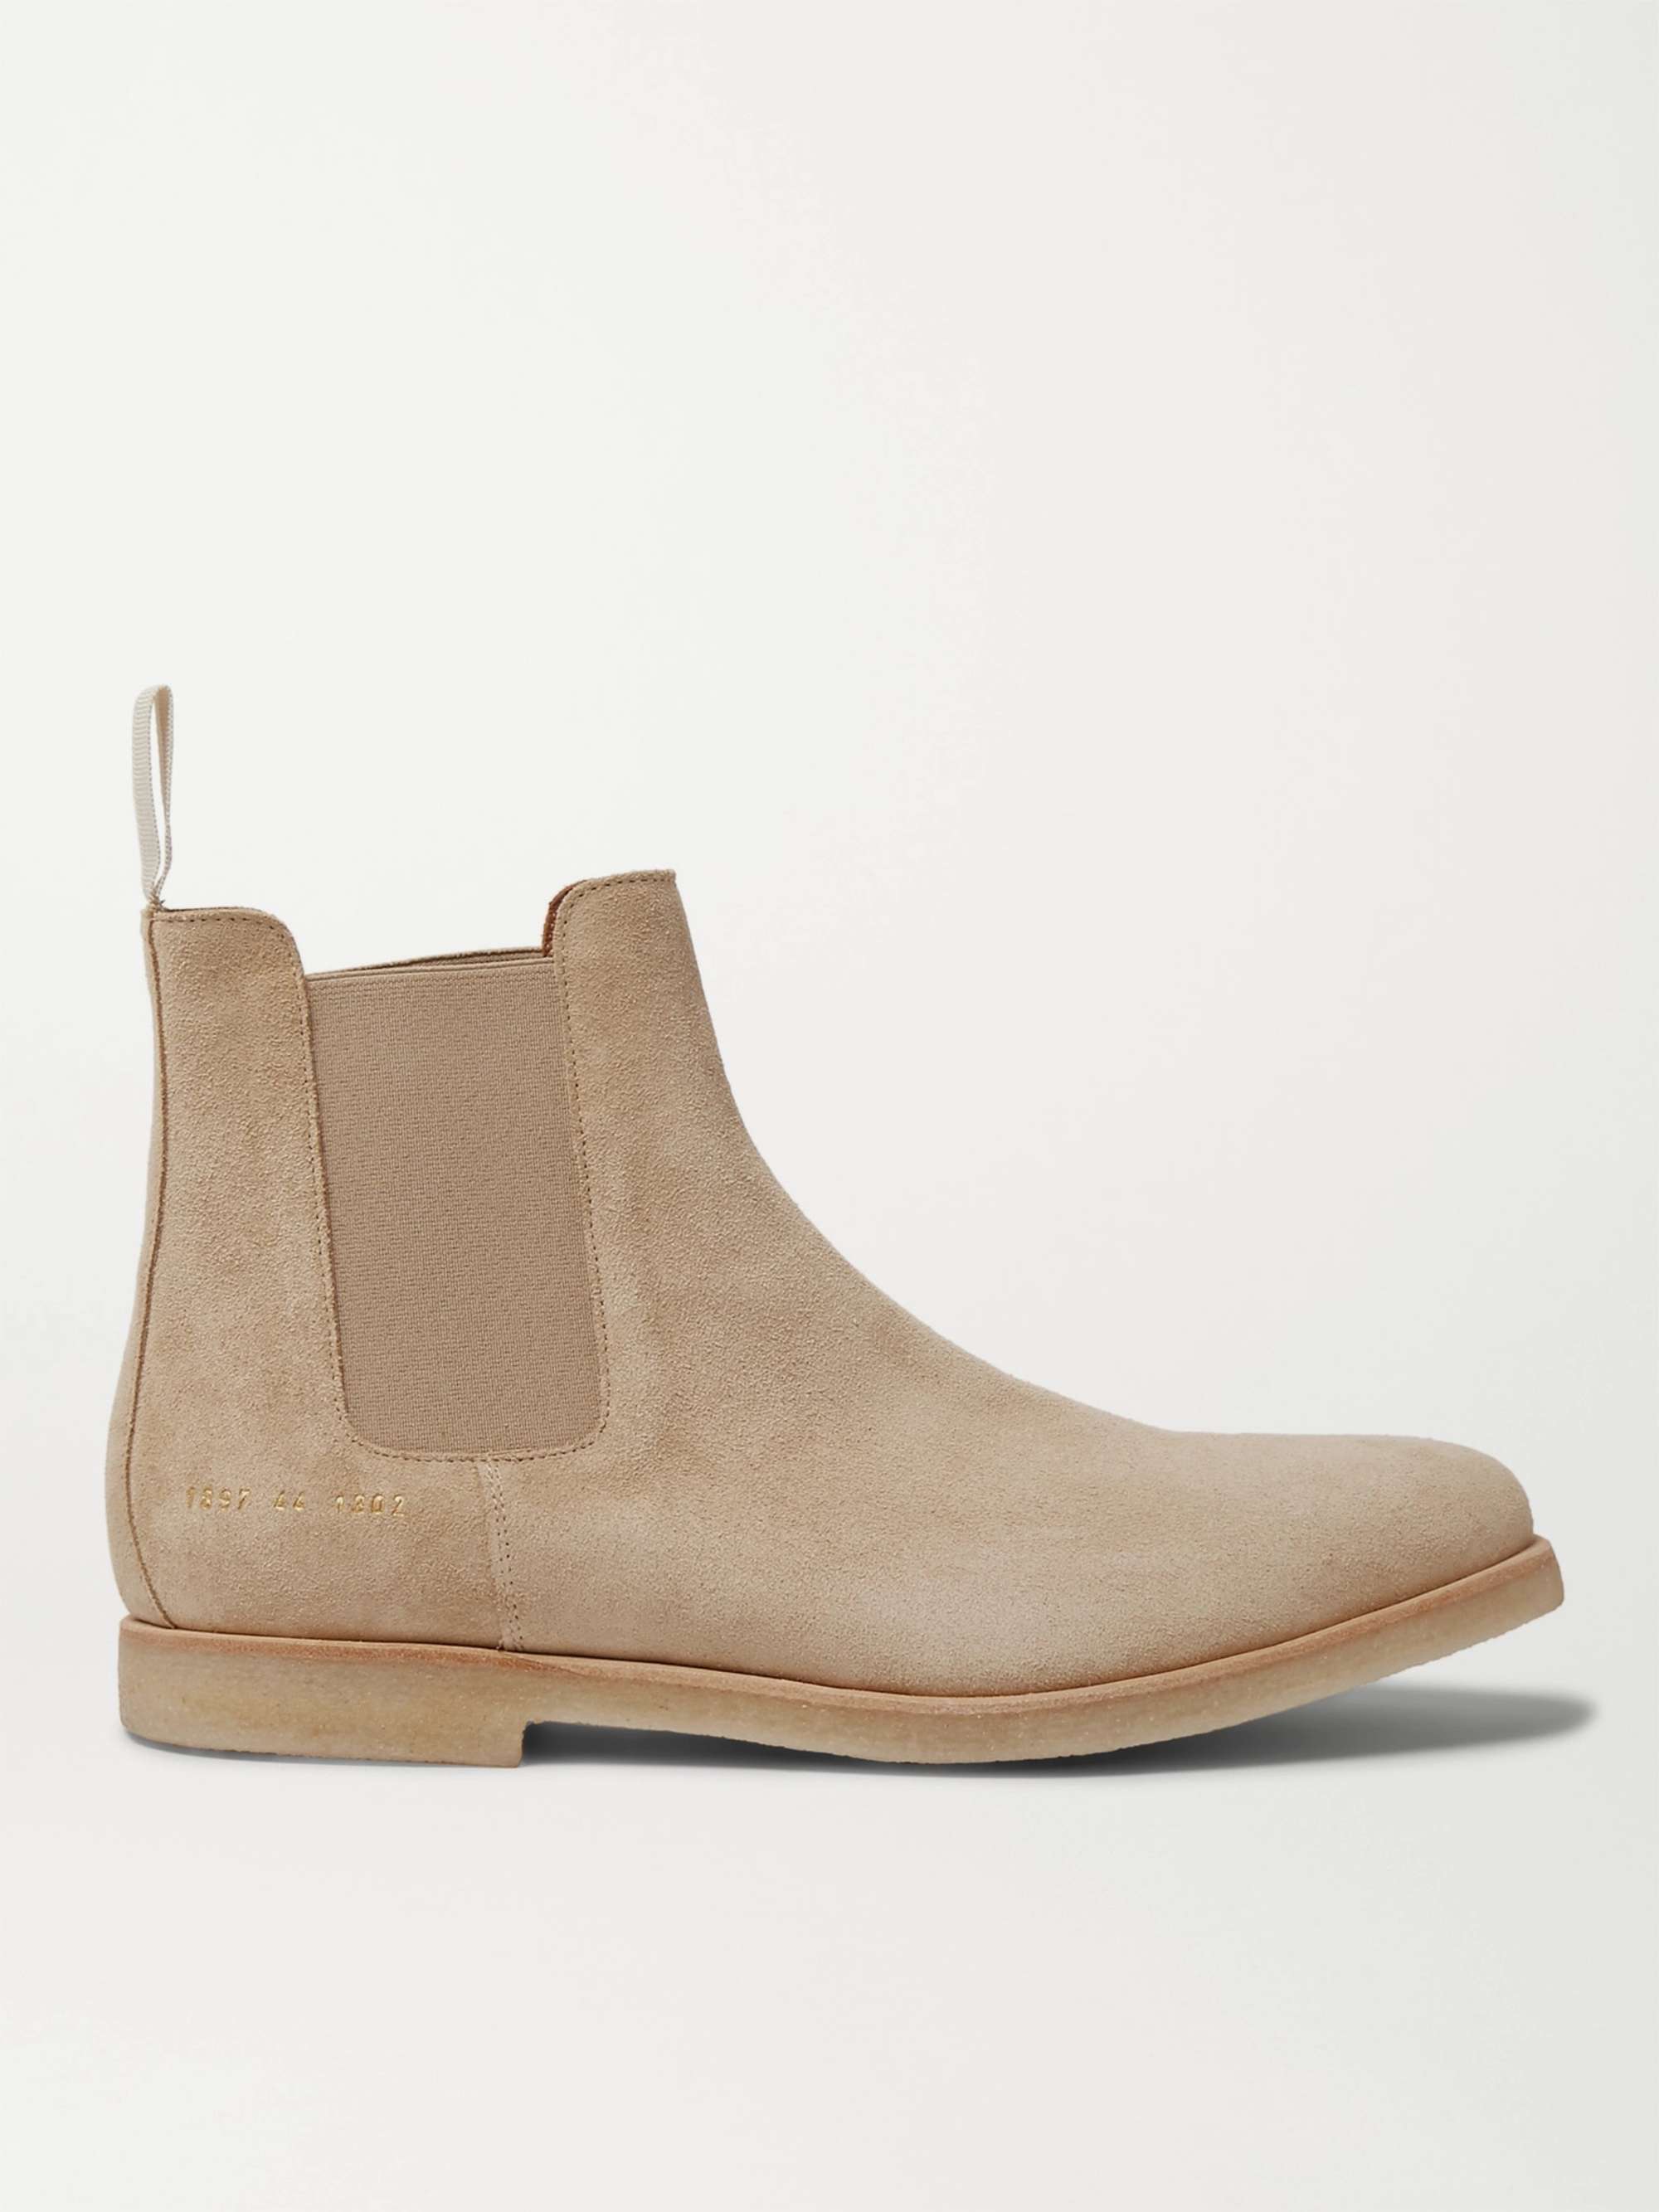 COMMON PROJECTS Suede Chelsea Boots for Men | MR